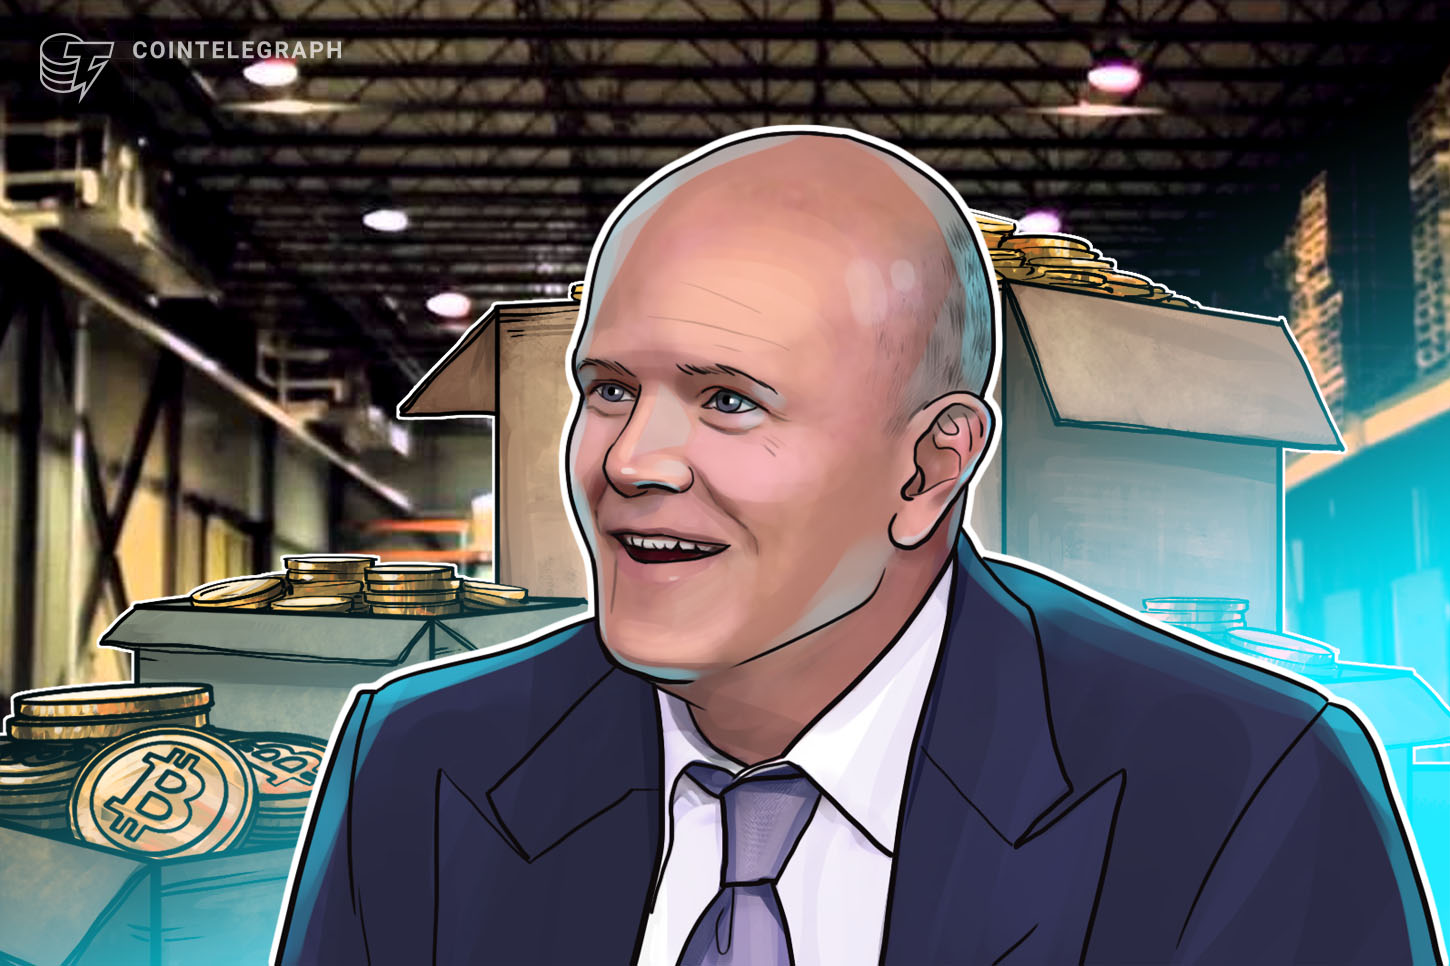 Mike Novocrats argues for 50% of net worth in cryptocurrencies, up to 5% for investors